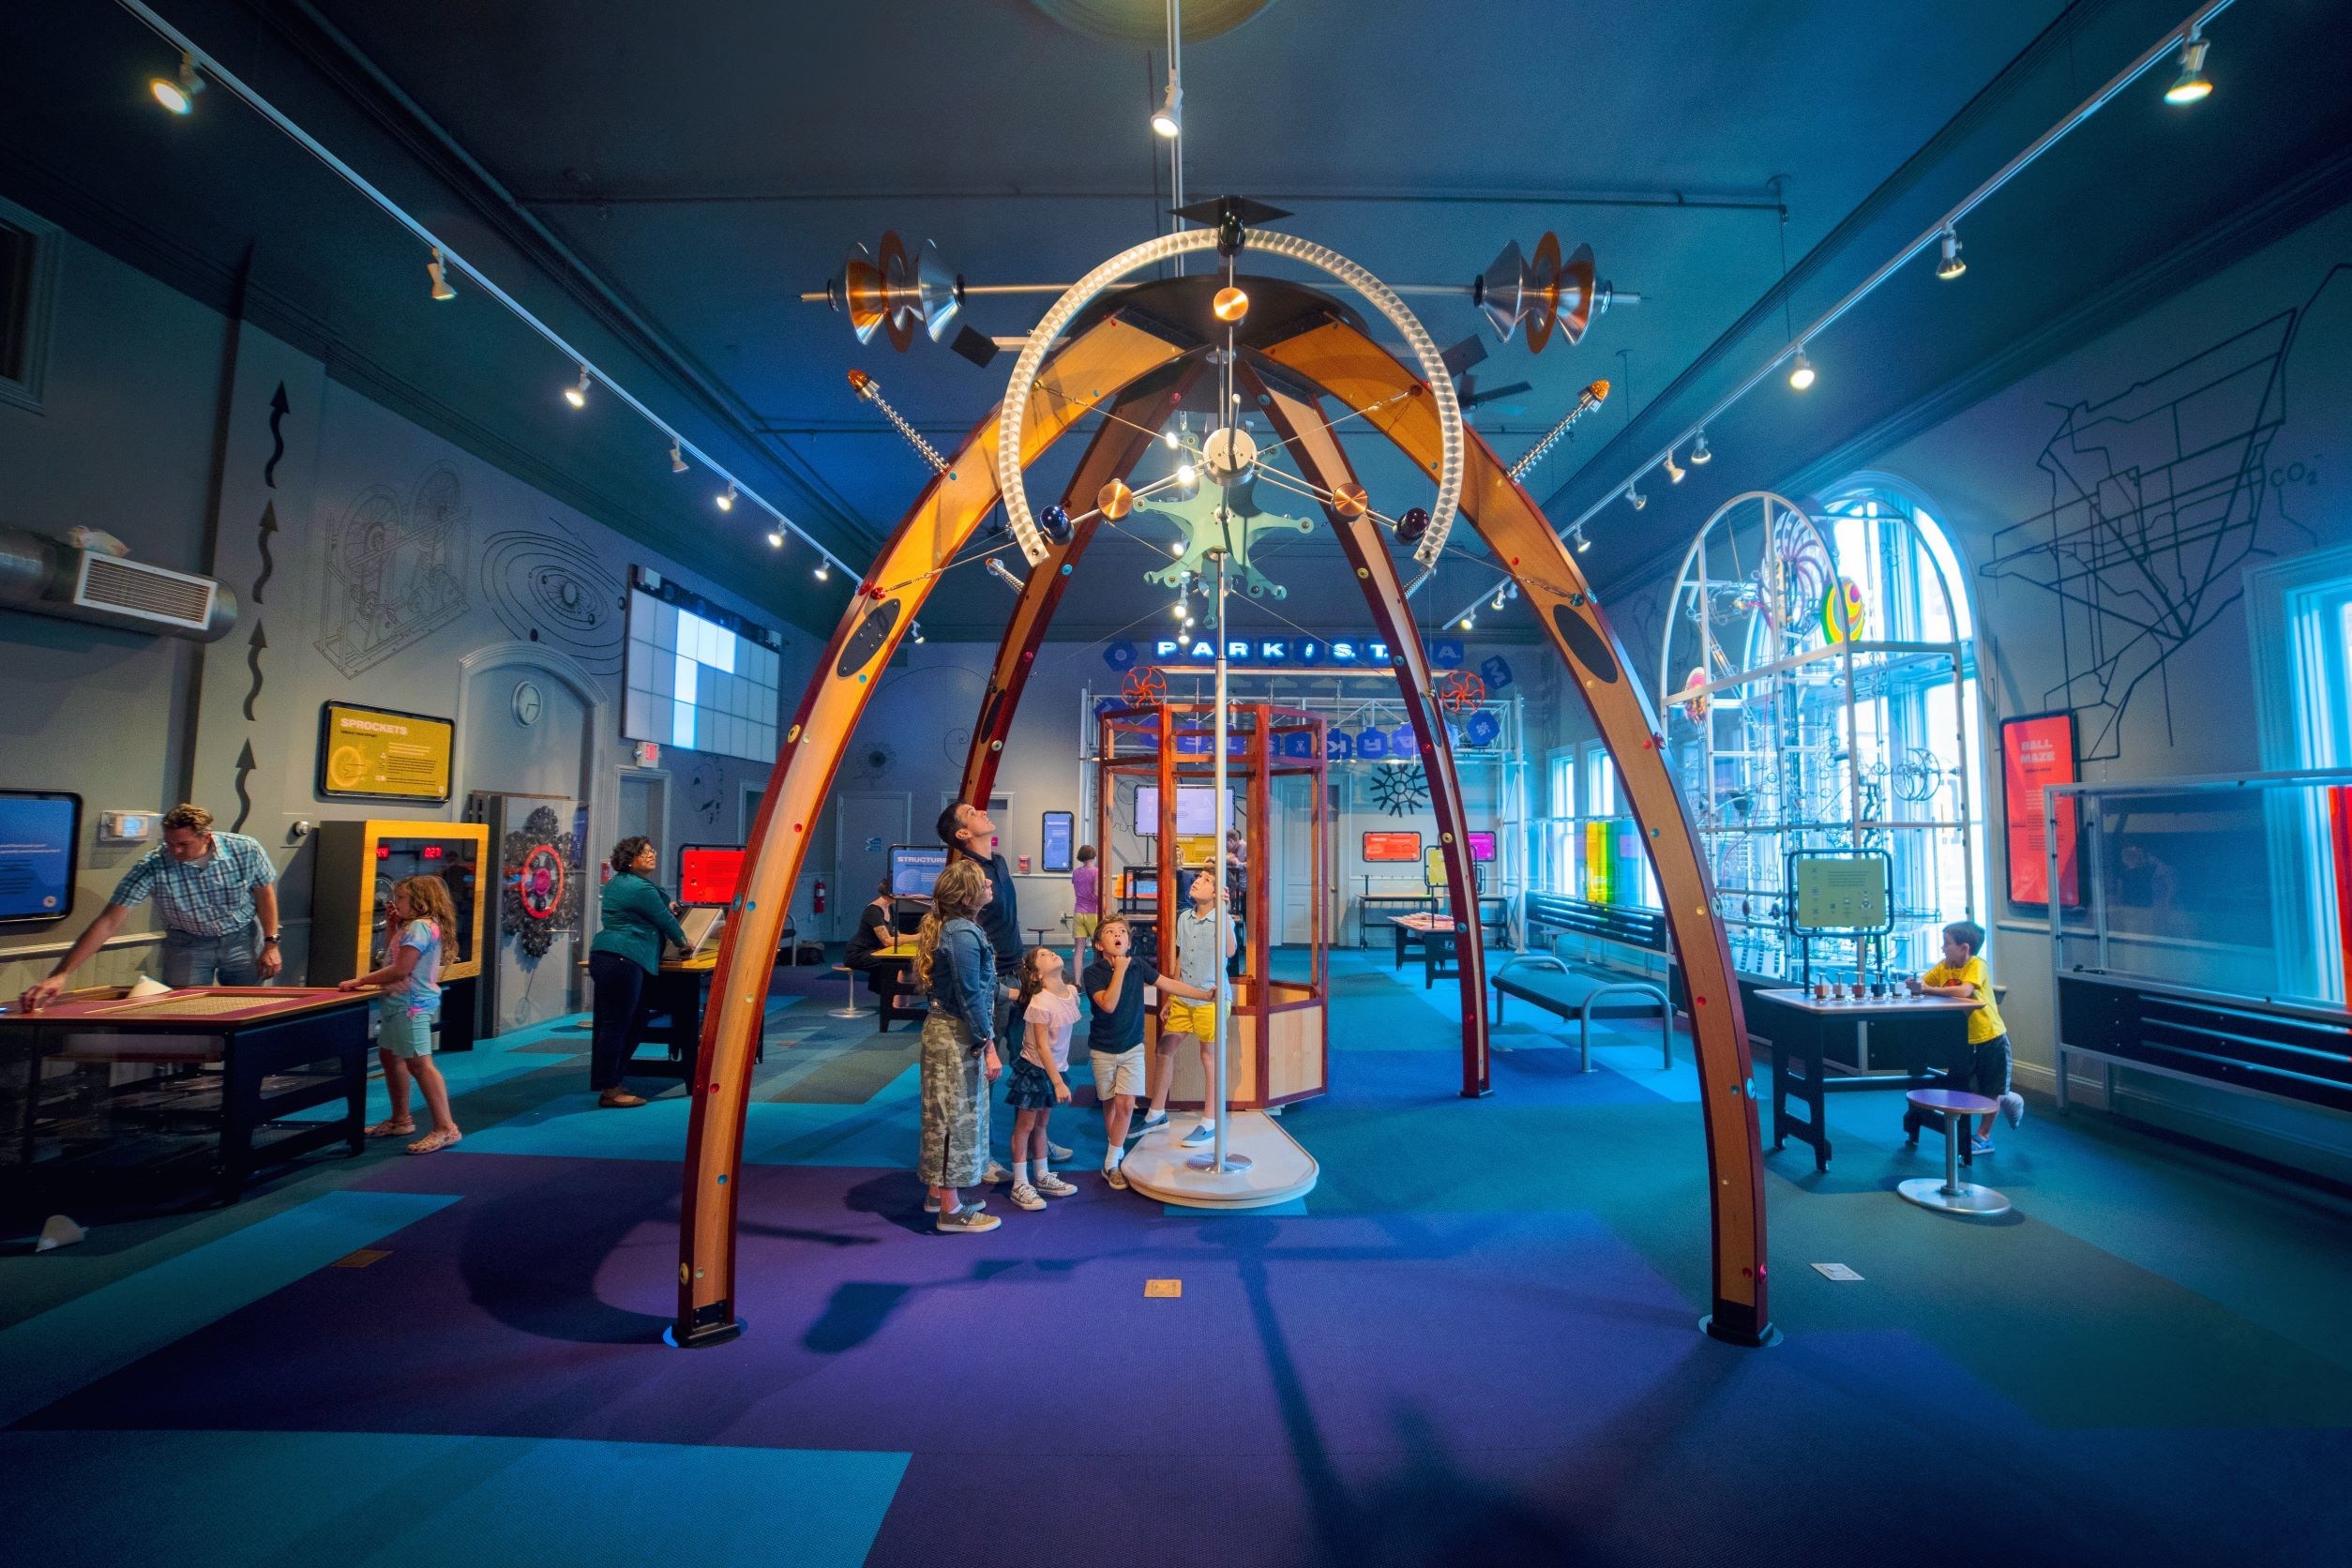 STEAM PARK at Ann Arbor Hands-on Museum Debuts in August